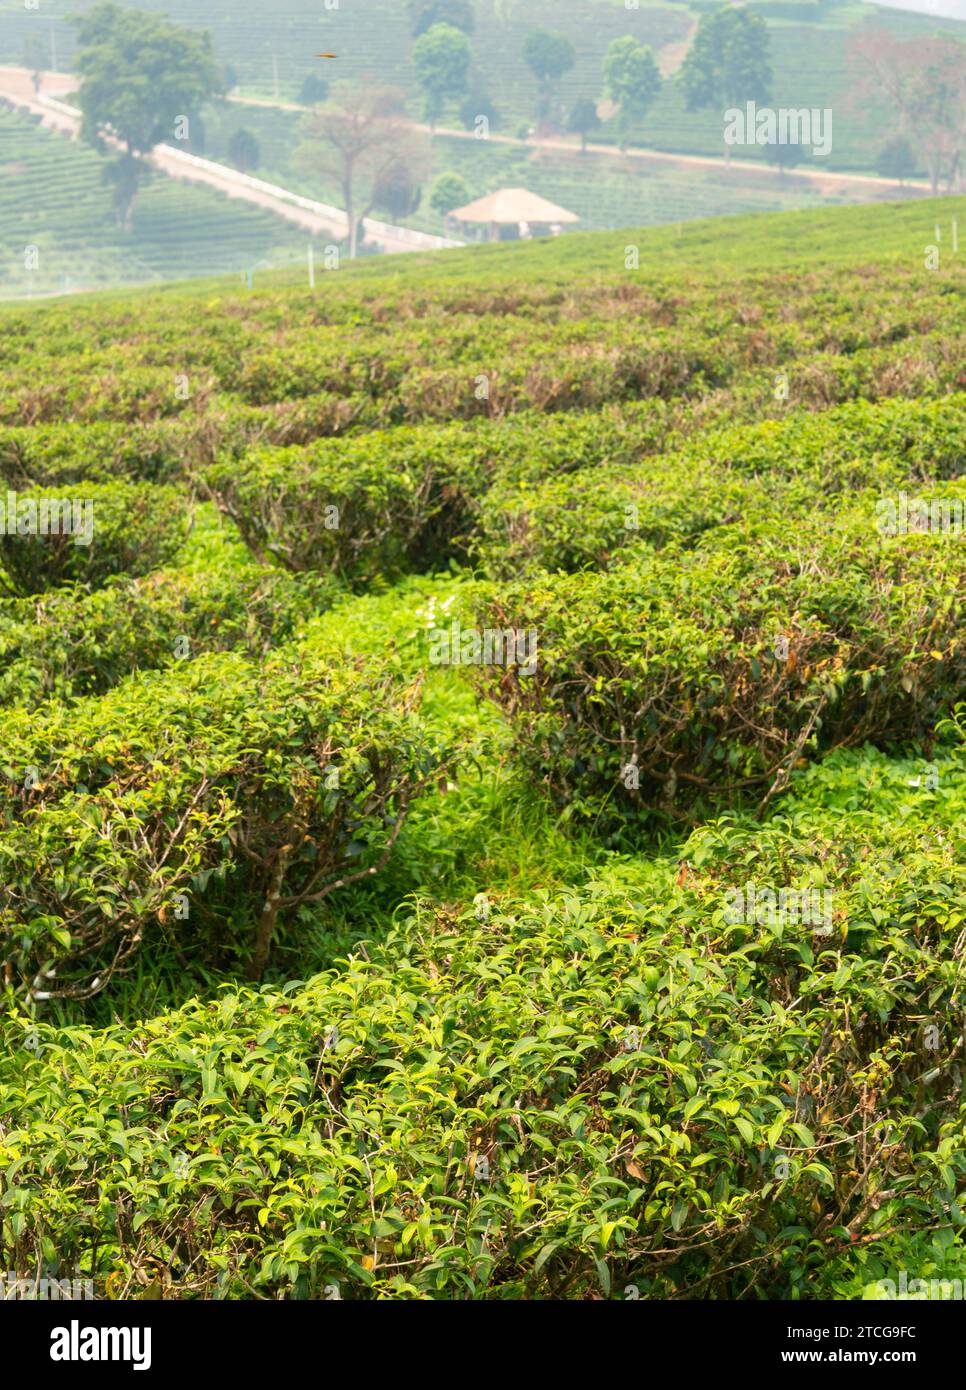 Hundreds of rows of healthy,green,organic lush Thai tea plants,and buildings beyond,in one of Thailand's largest,fine quality tea producing areas. A h Stock Photo